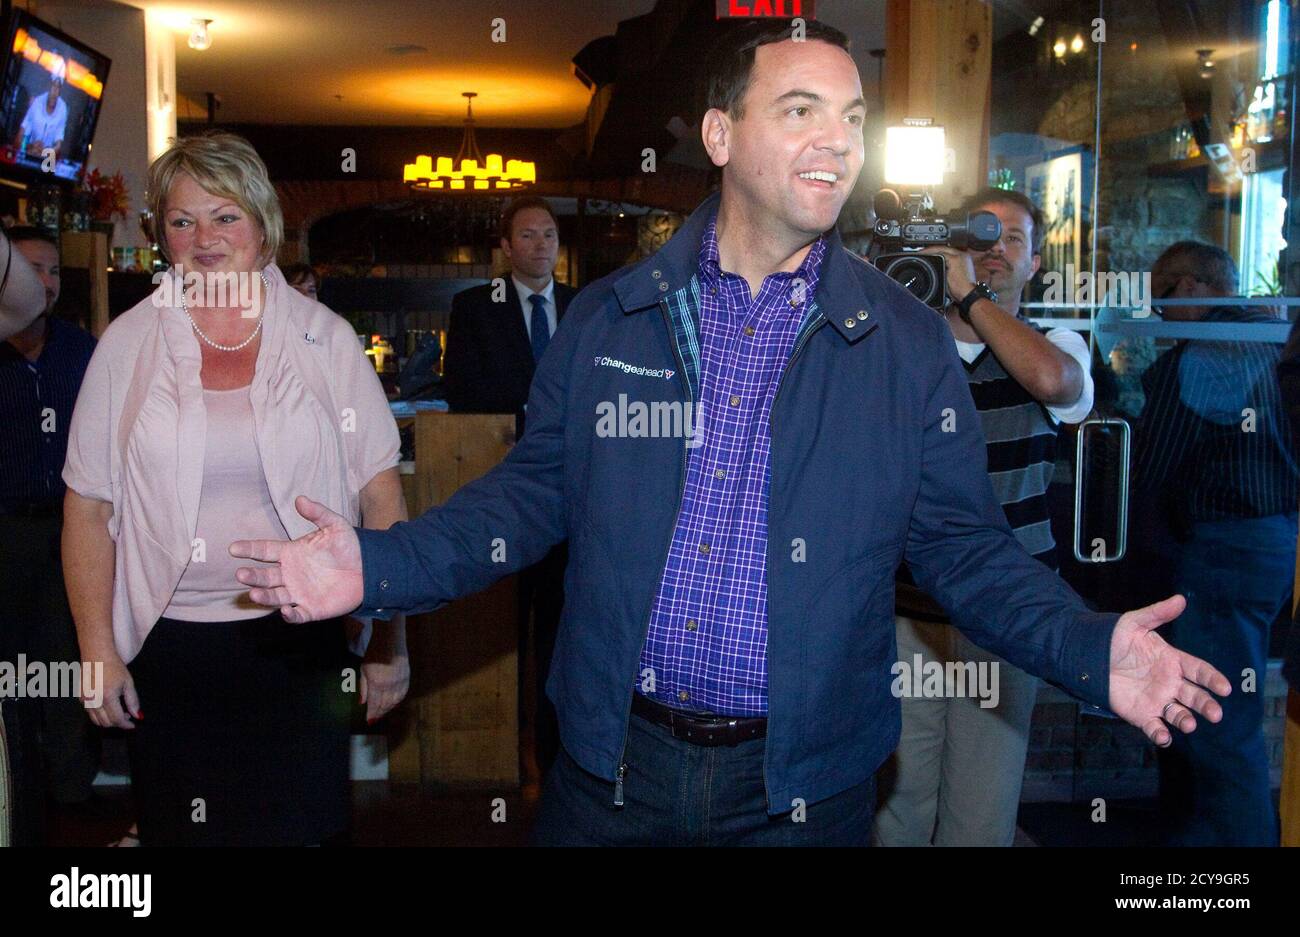 Ontario Progressive Conservative Party Leader Tim Hudak makes a campaign stop, with local candidate Sandie Bellows (L), at Johnny Rocco's Italian Grill in St. Catharines, Ontario, on Election Day October 6, 2011.  REUTERS/Fred Thornhill (CANADA - Tags: POLITICS ELECTIONS) Stock Photo